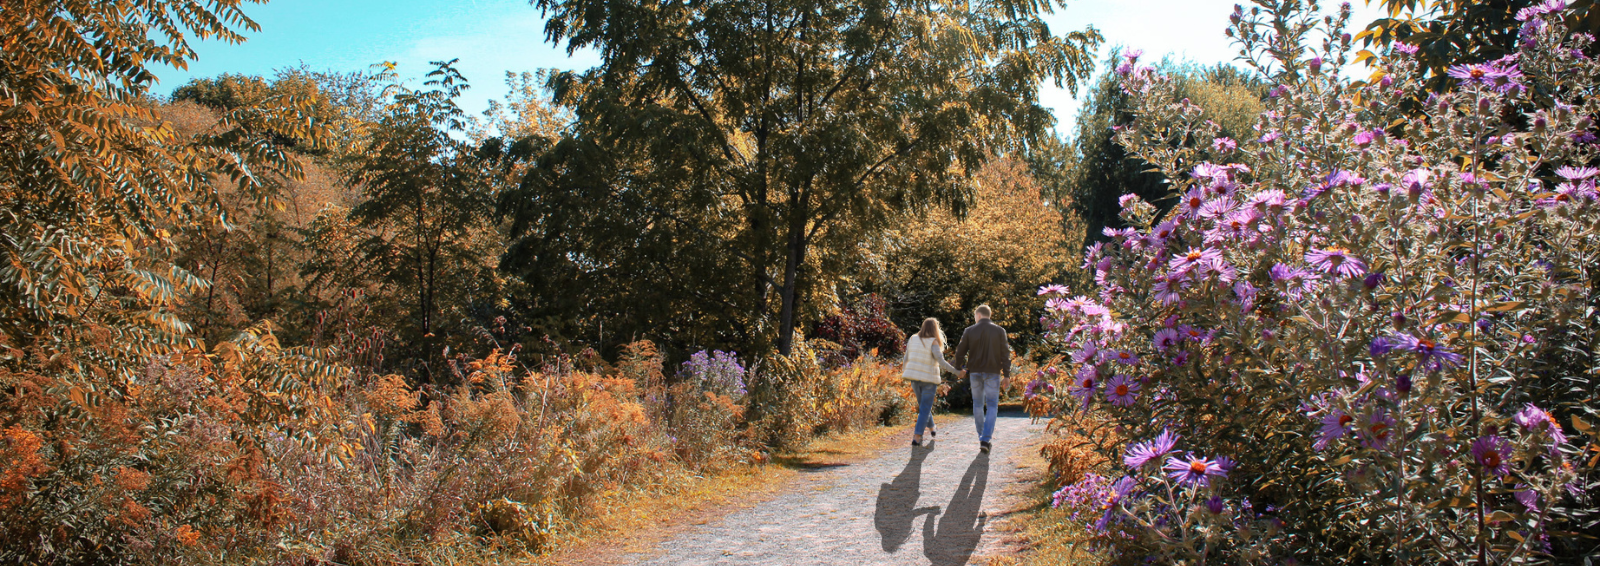 Couple walking down pictureque nature path in autumn